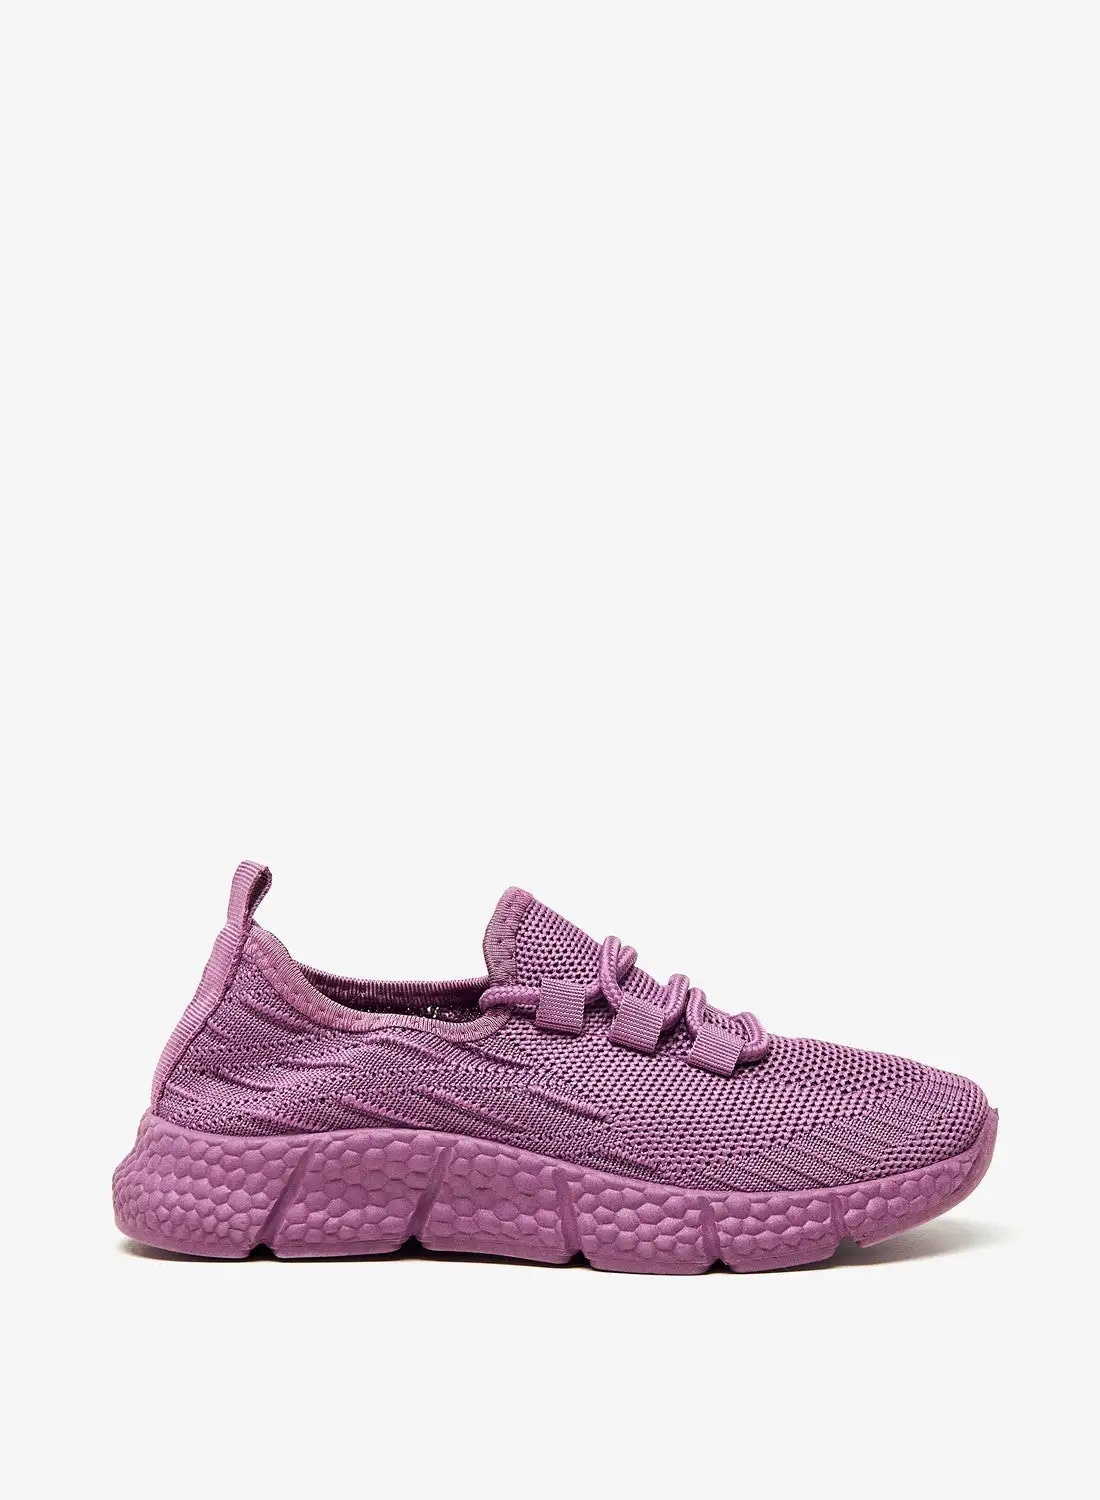 shoexpress Girls Textured Sports Shoes with Lace-Up Closure